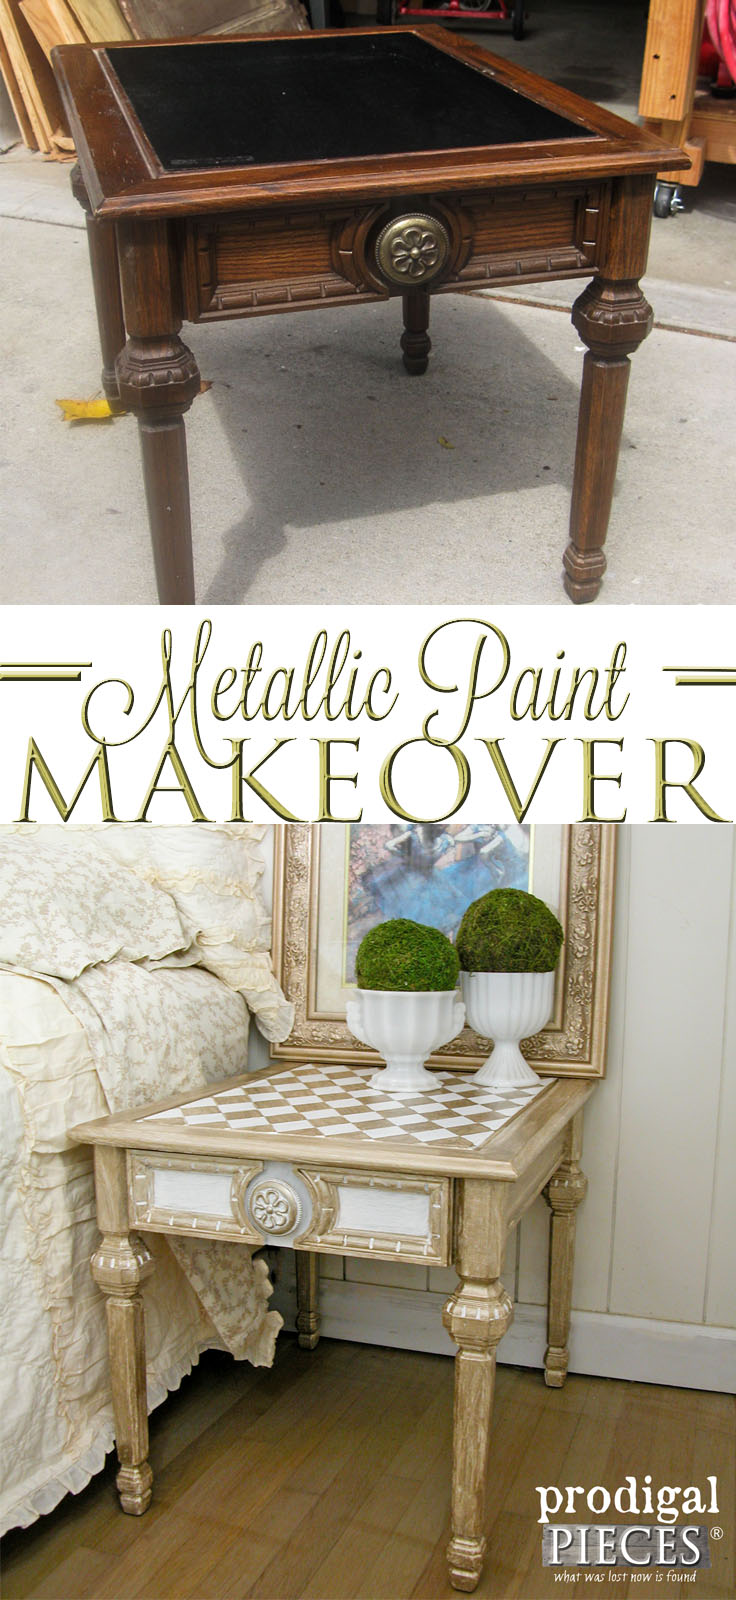 Refresh Your Outdated Furniture with Metallic Paint | Harlequin Design and Style by Prodigal Pieces | www.prodigalpieces.com